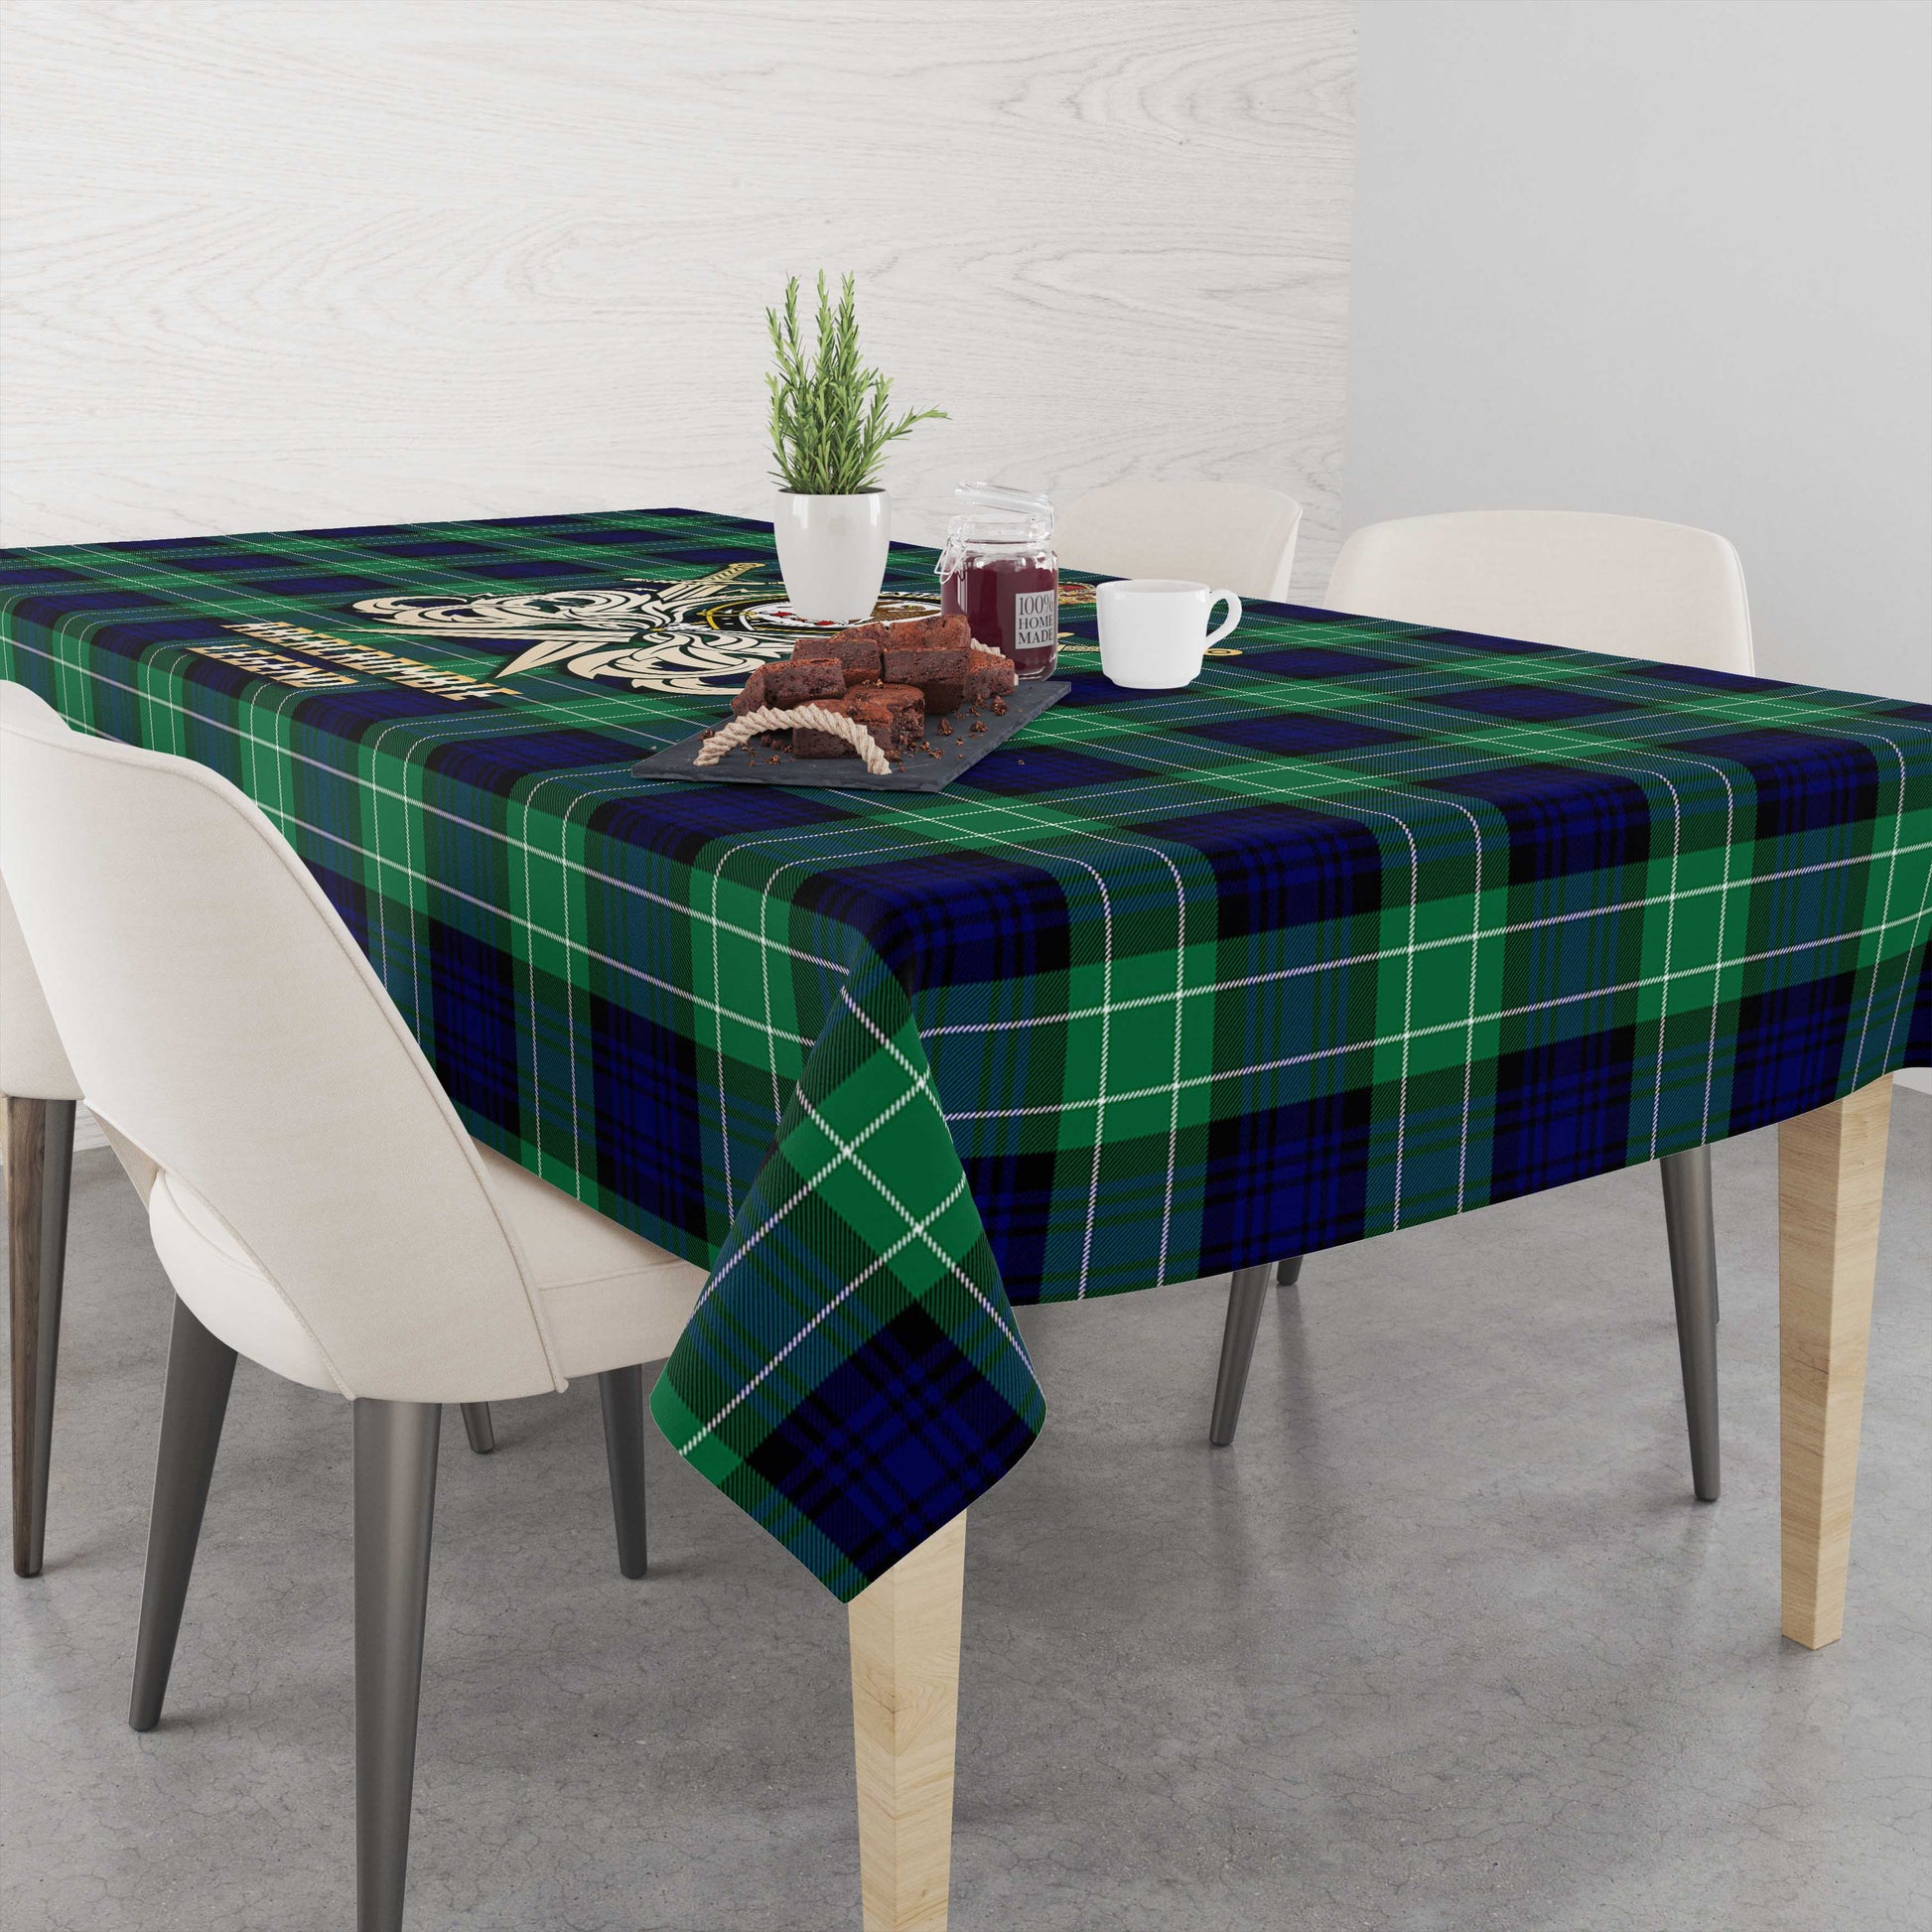 Tartan Vibes Clothing Abercrombie Tartan Tablecloth with Clan Crest and the Golden Sword of Courageous Legacy